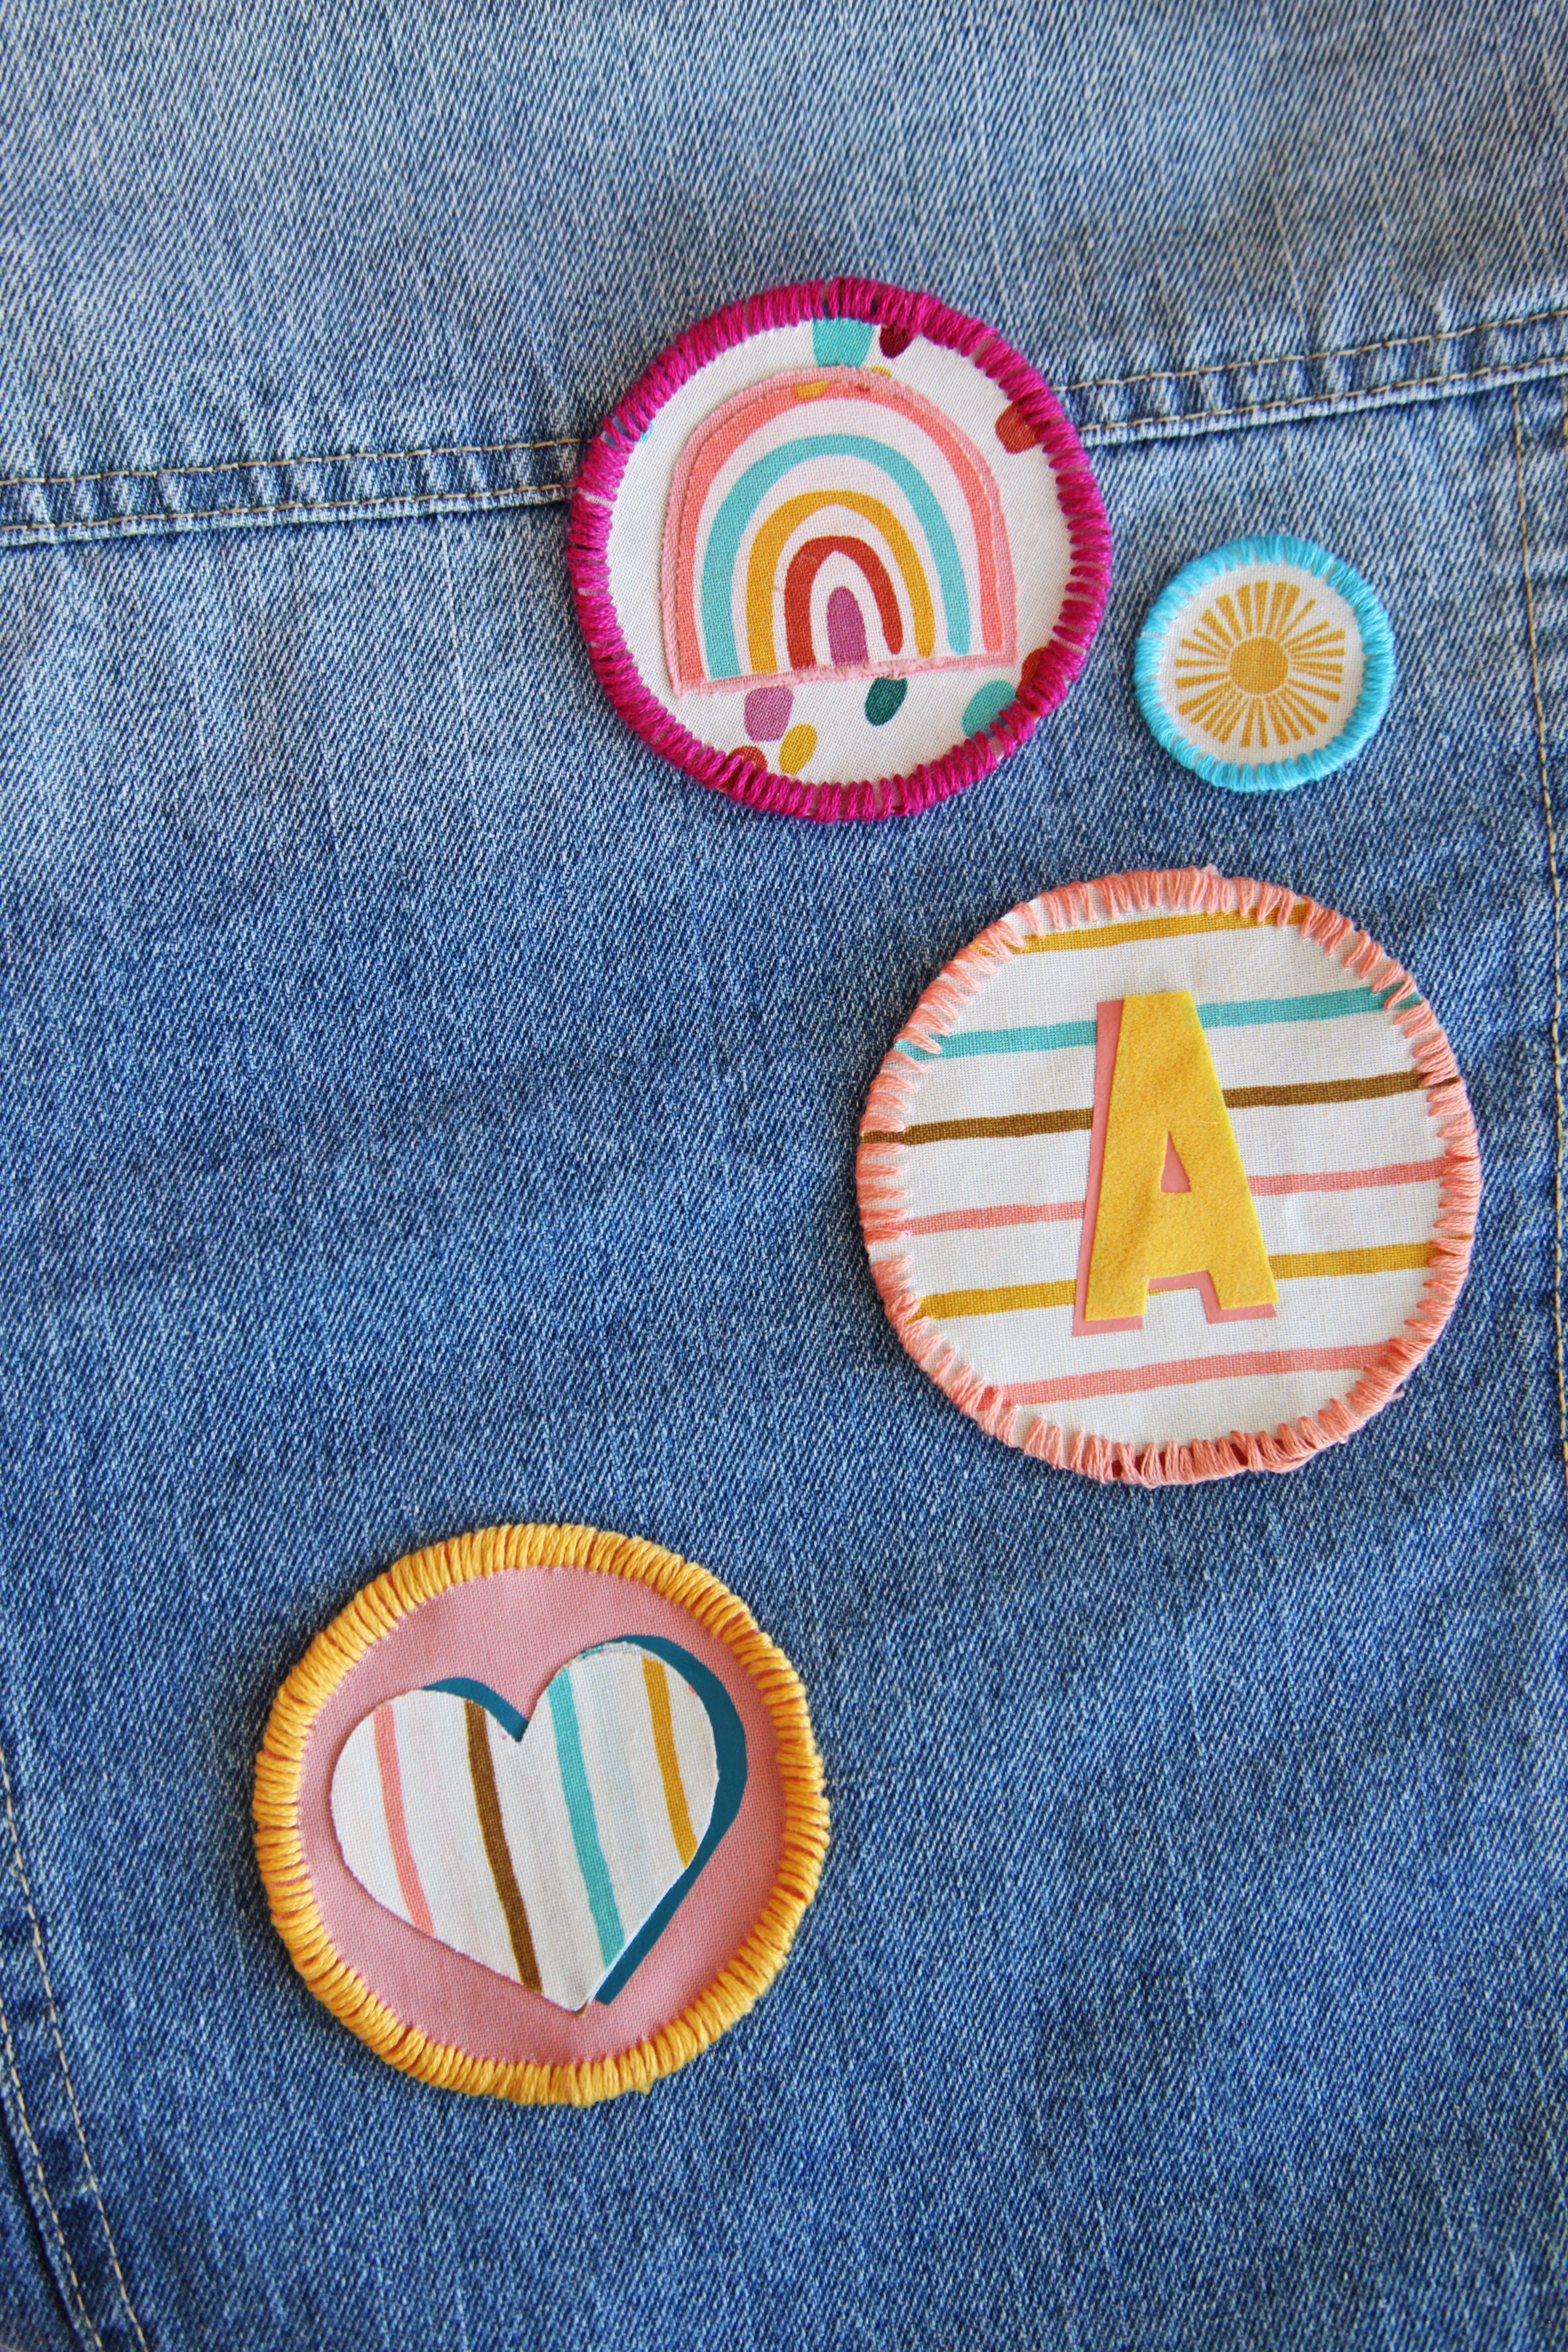 DIY Fabric Patches Step by Step Tutorial